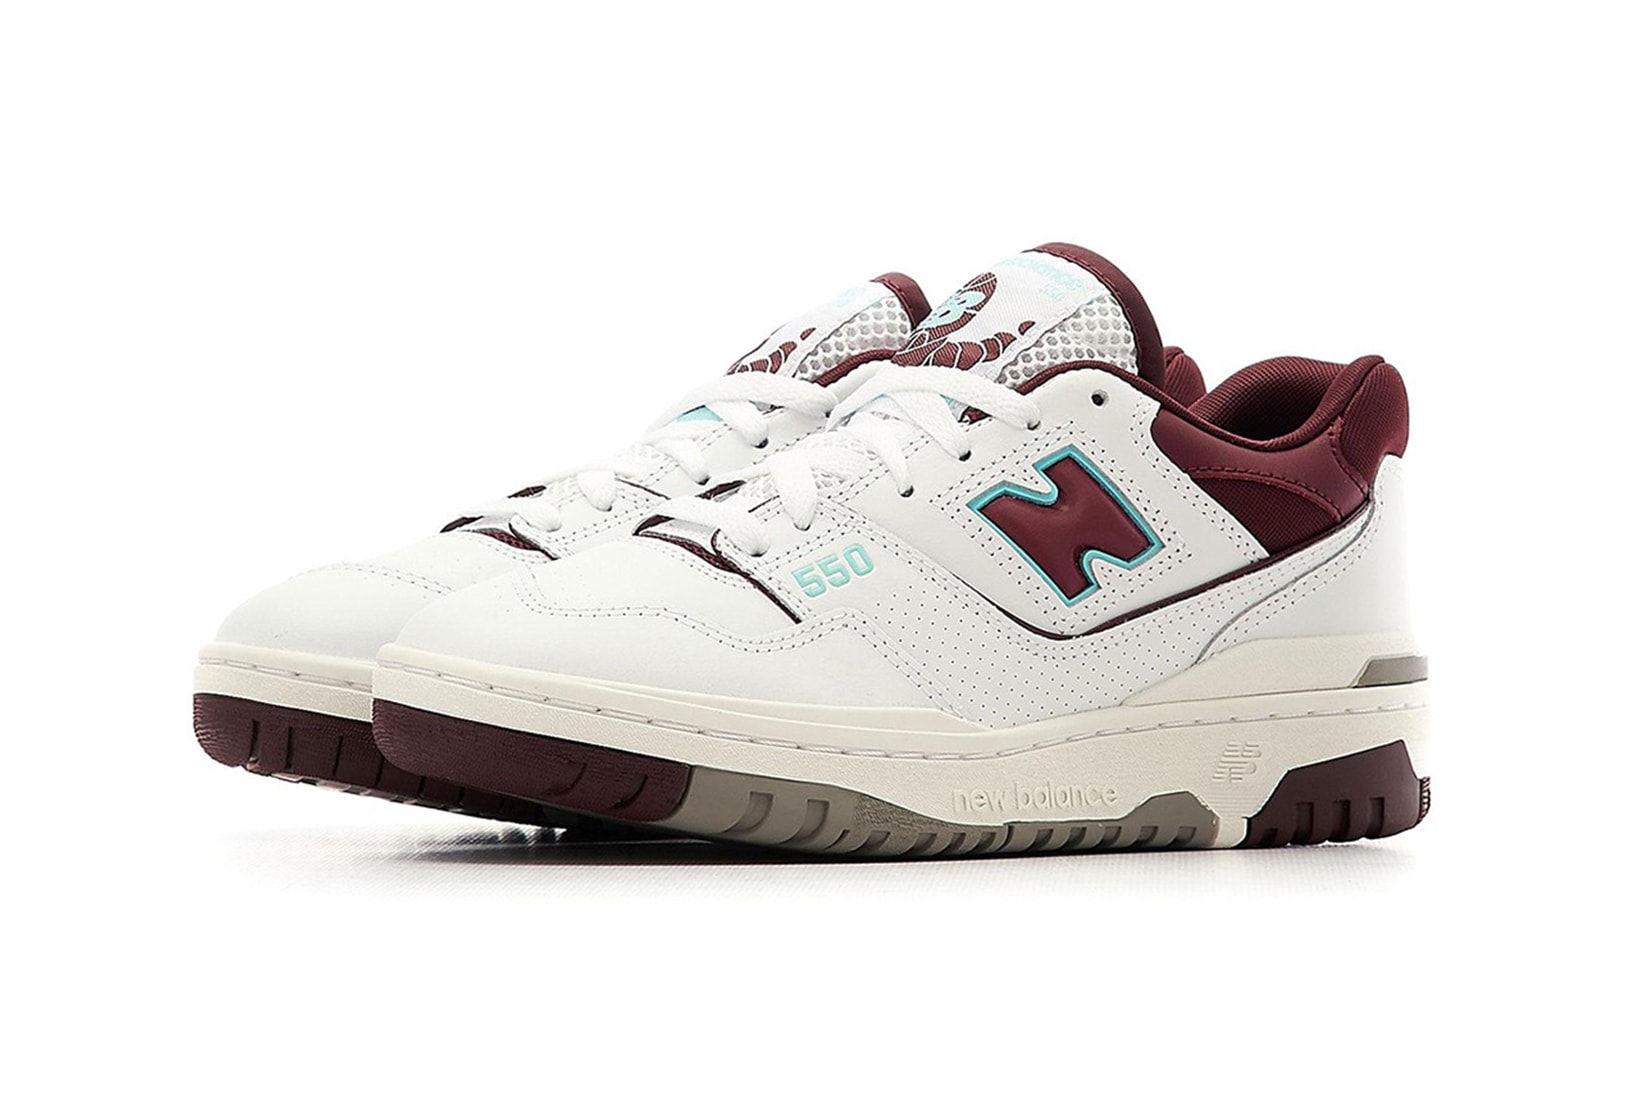 New balance 550 Sneakers Burgundy Blue Product Shot